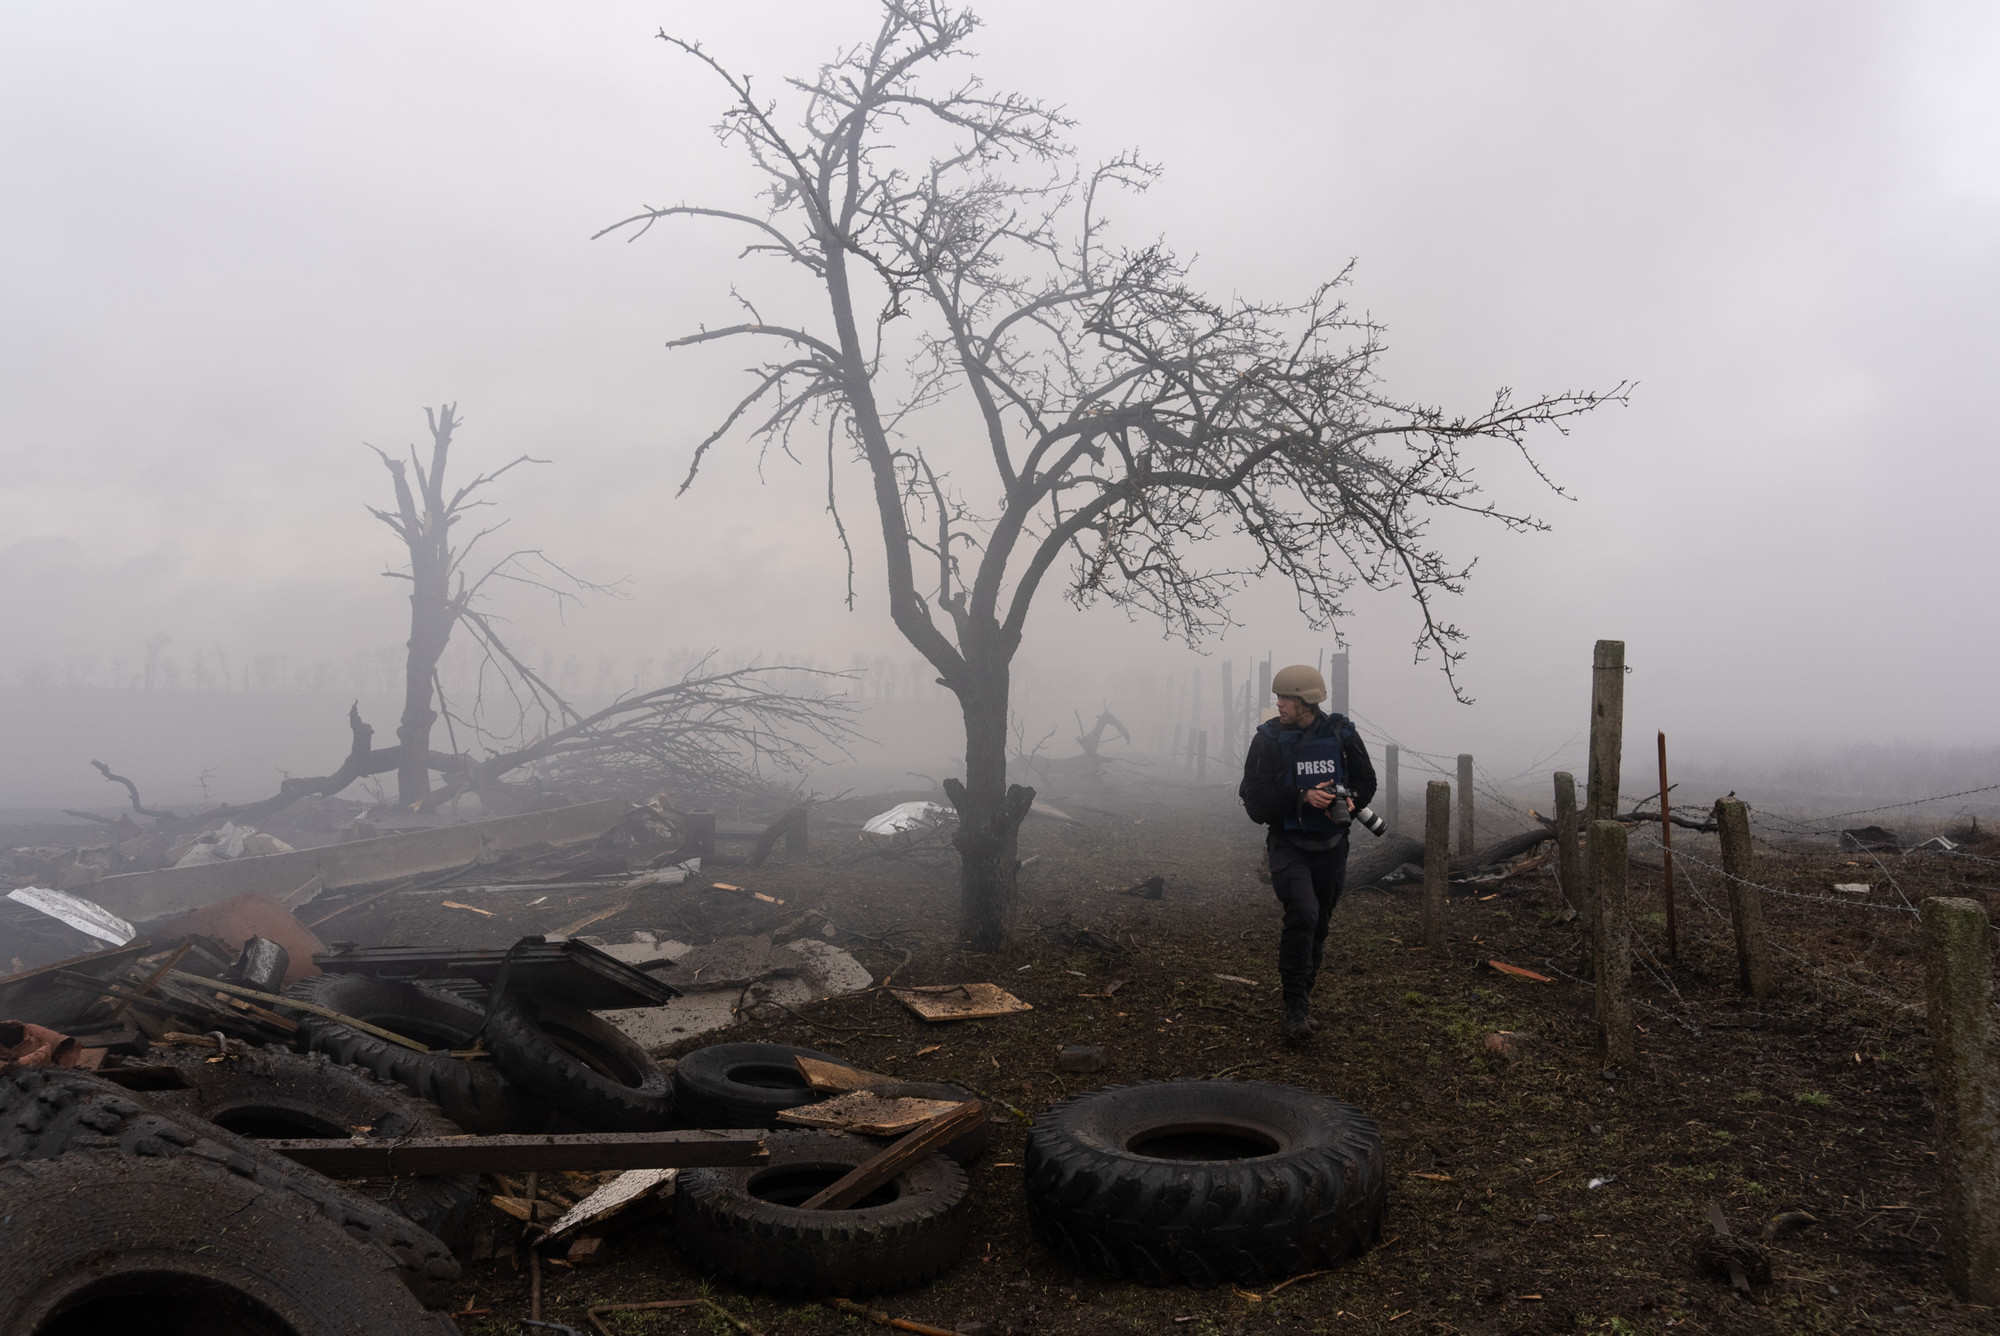 Photographer Evgeniy Maloletka picks his way through the aftermath of a Russian attack in Mariupol, Ukraine, Feb. 24, 2022. Still from FRONTLINE PBS and AP’s feature film “20 Days in Mariupol.” CREDIT: (AP Photo/Mstyslav Chernov)
